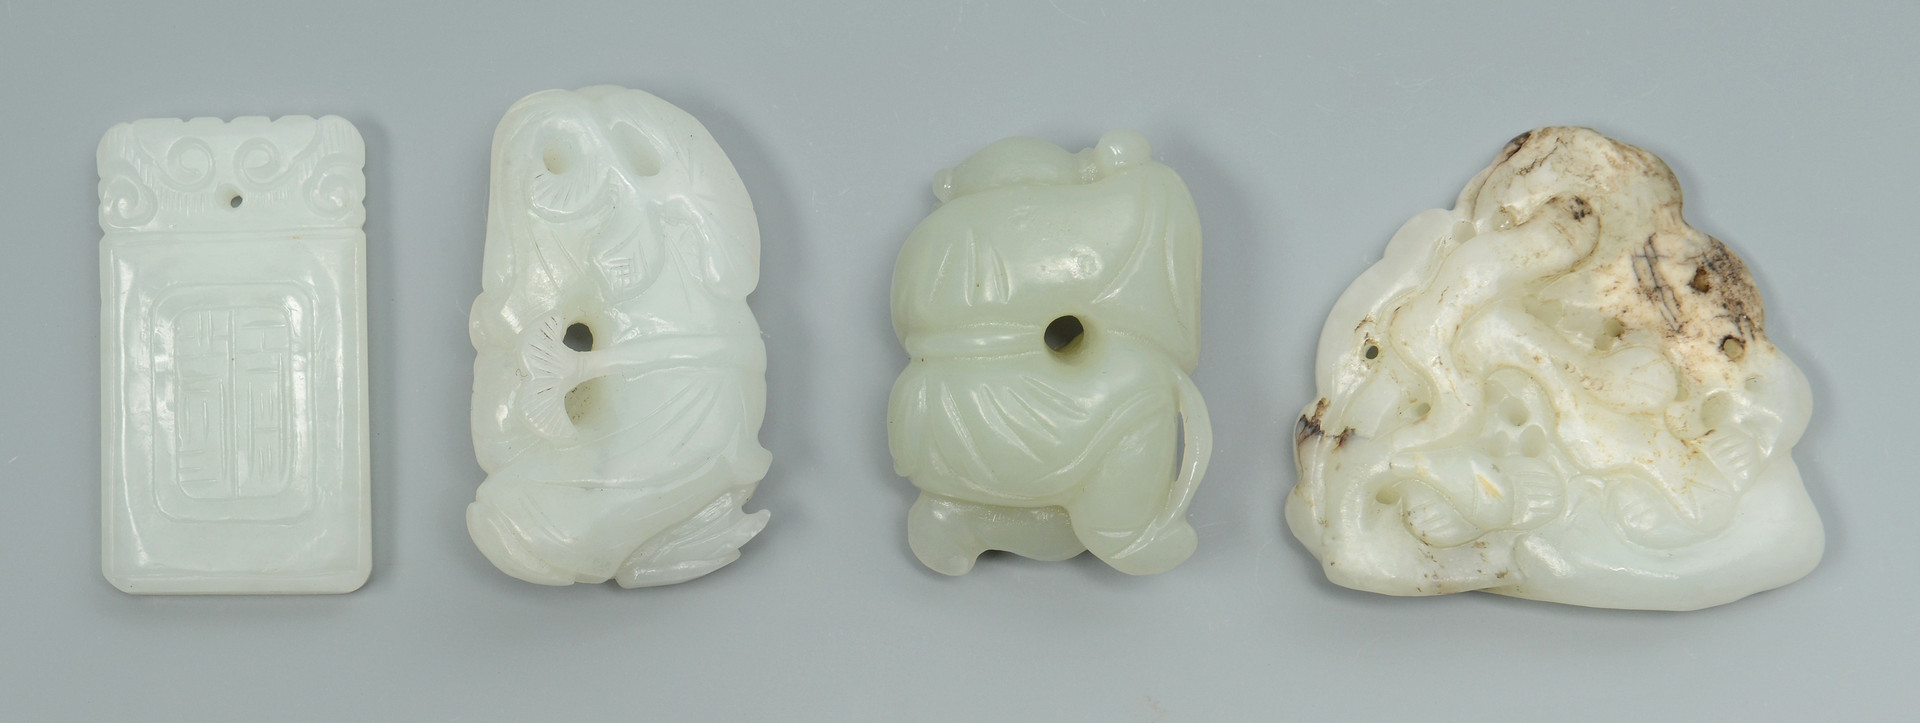 Lot 15: 4 Chinese Carved Jade Articles